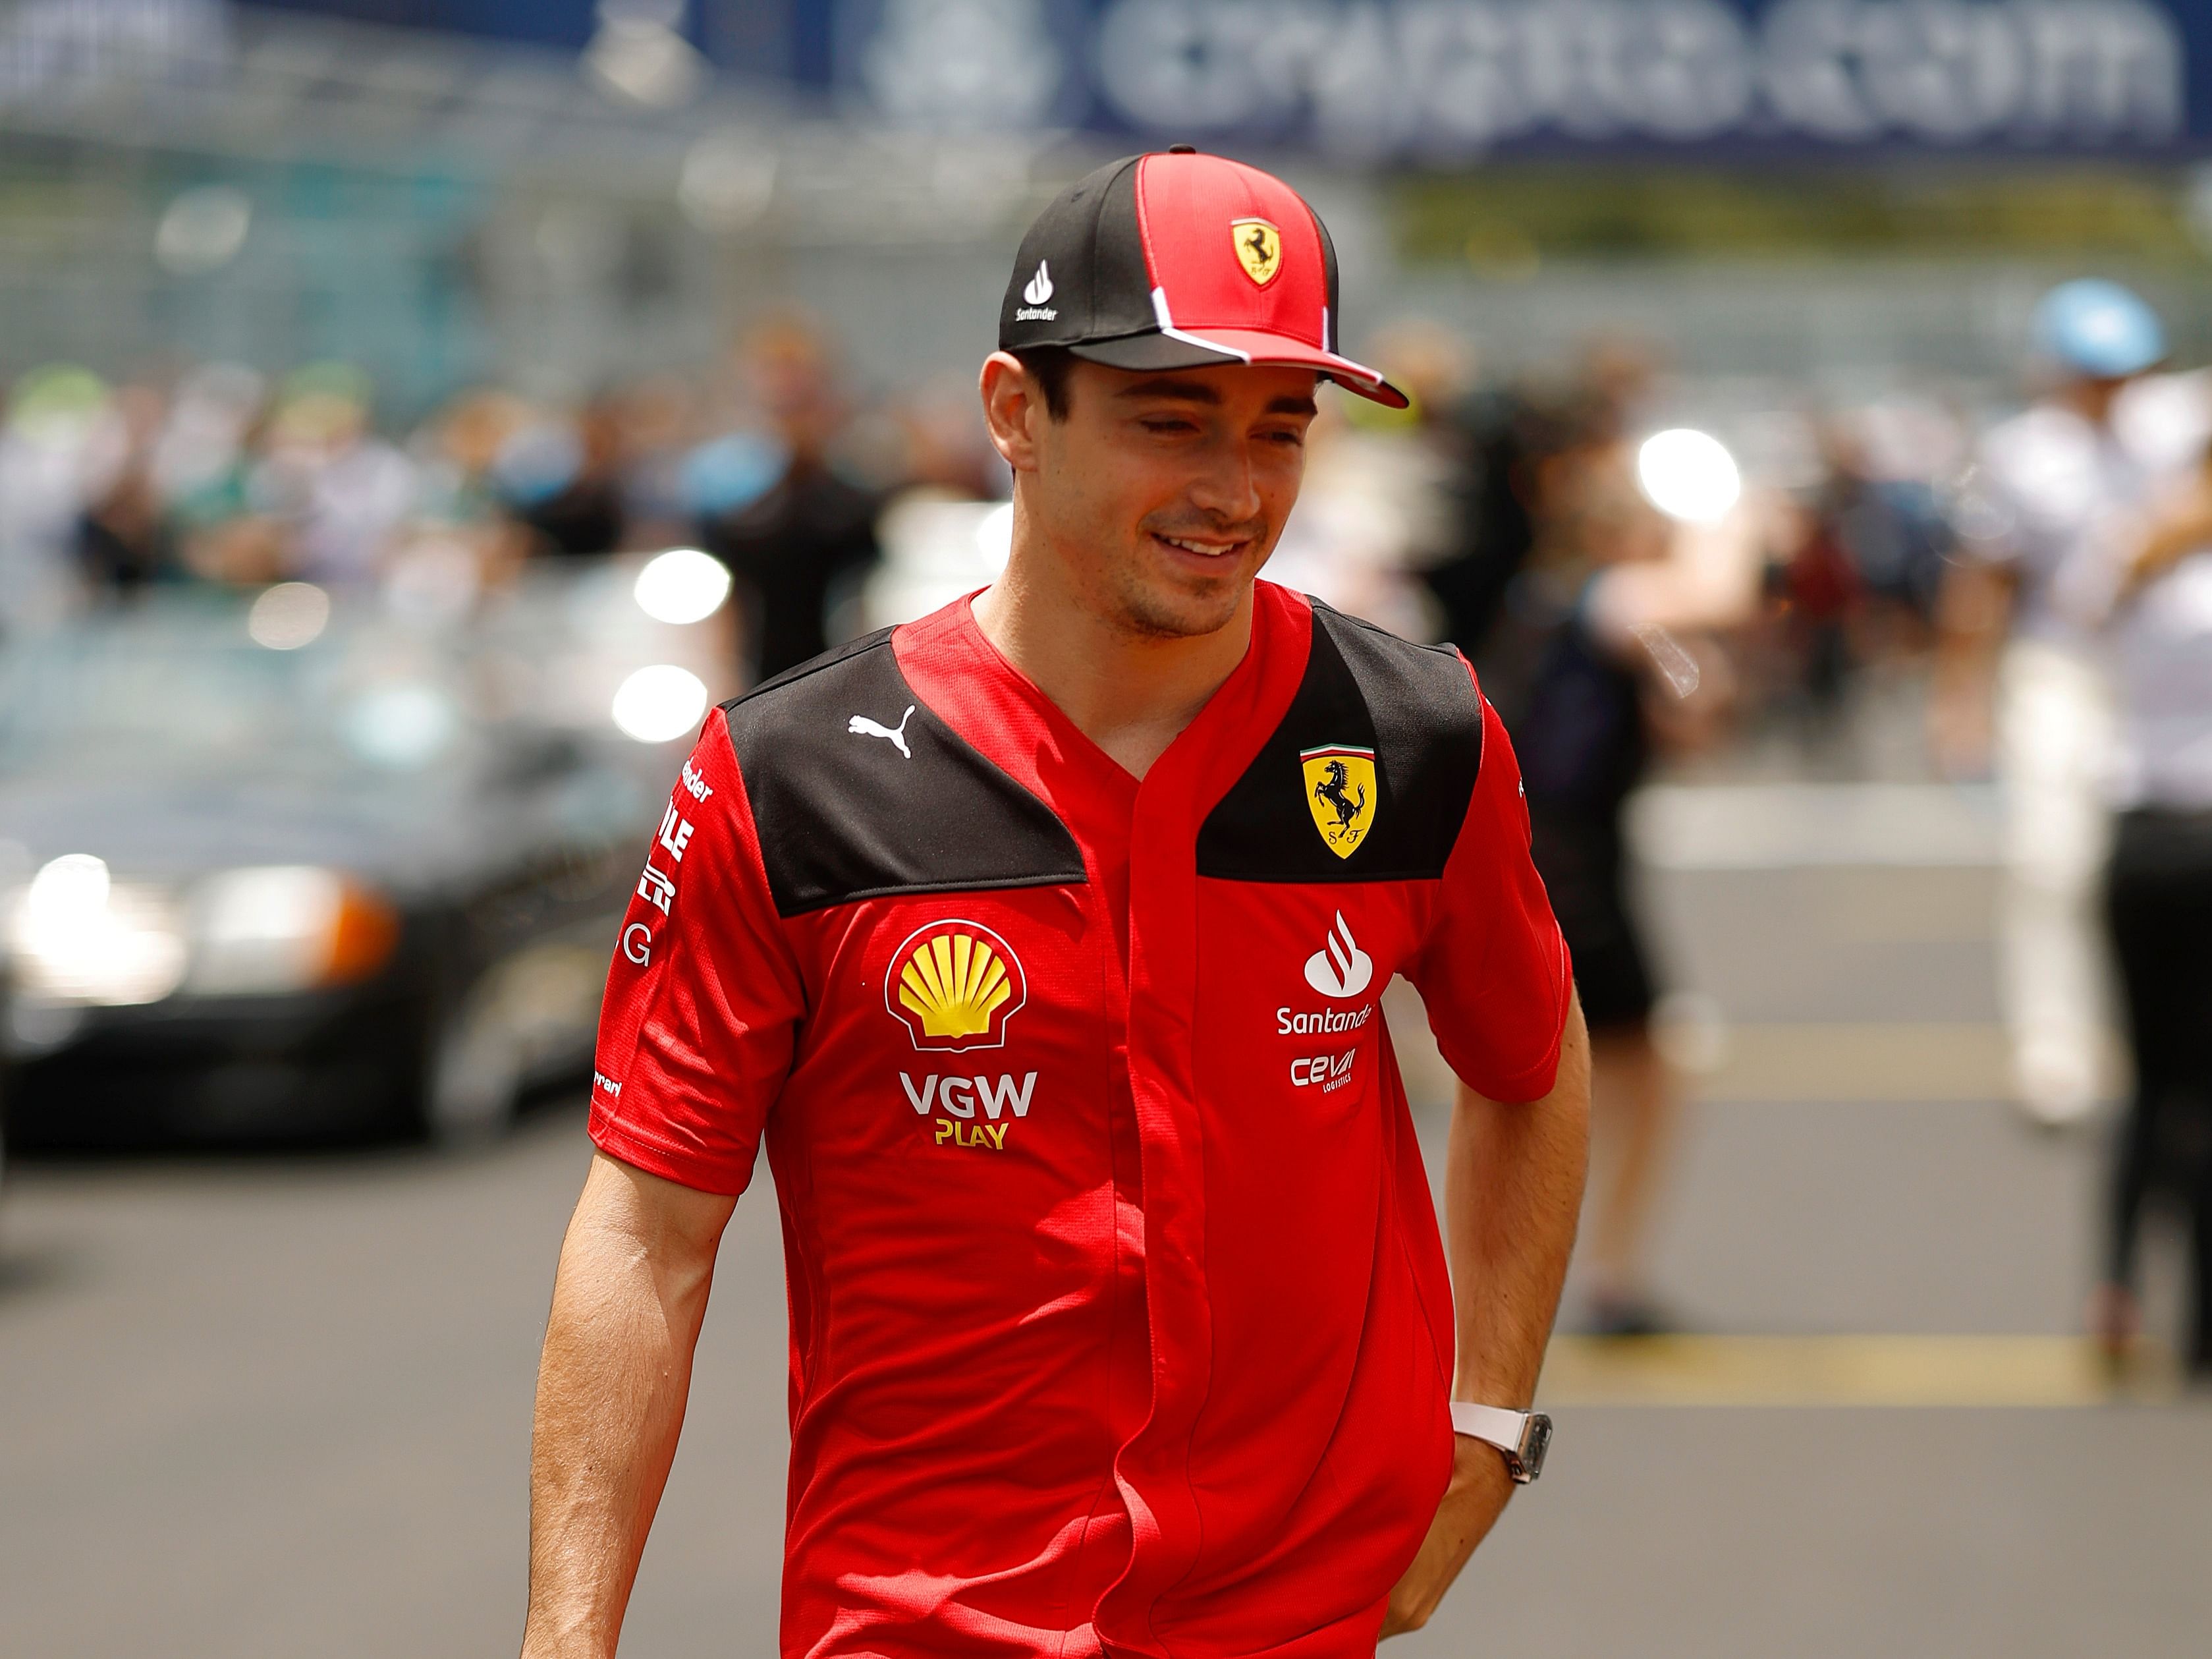 Charles Leclerc at the drivers parade prior to the 2023 F1 Miami Grand Prix. (Photo by Chris Graythen/Getty Images)